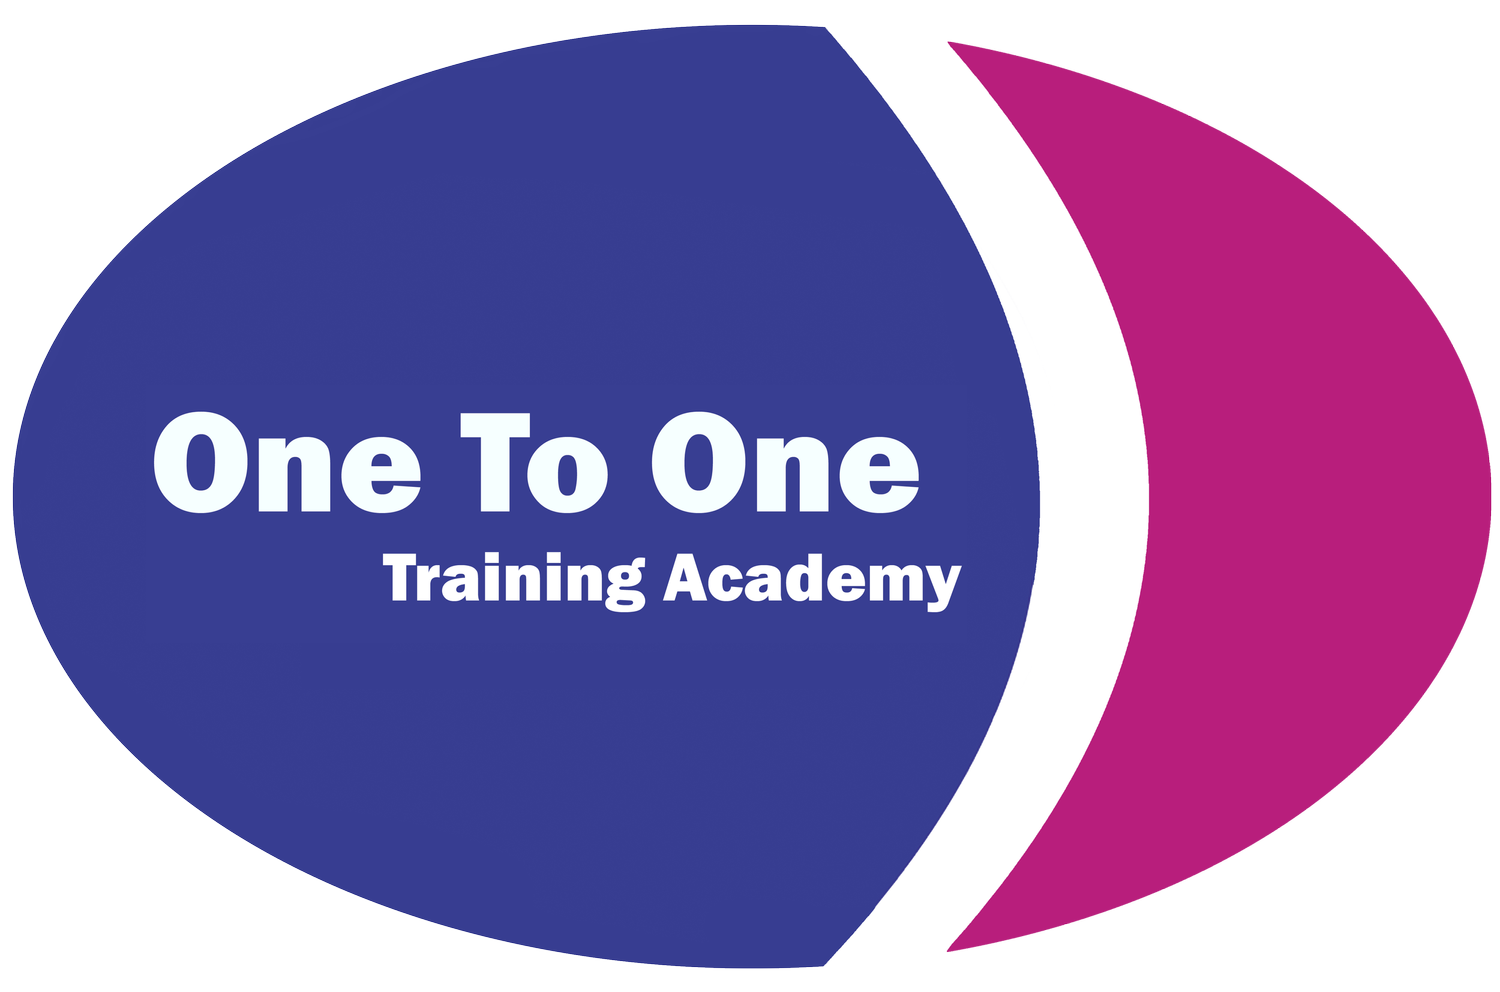 One to One Training Academy